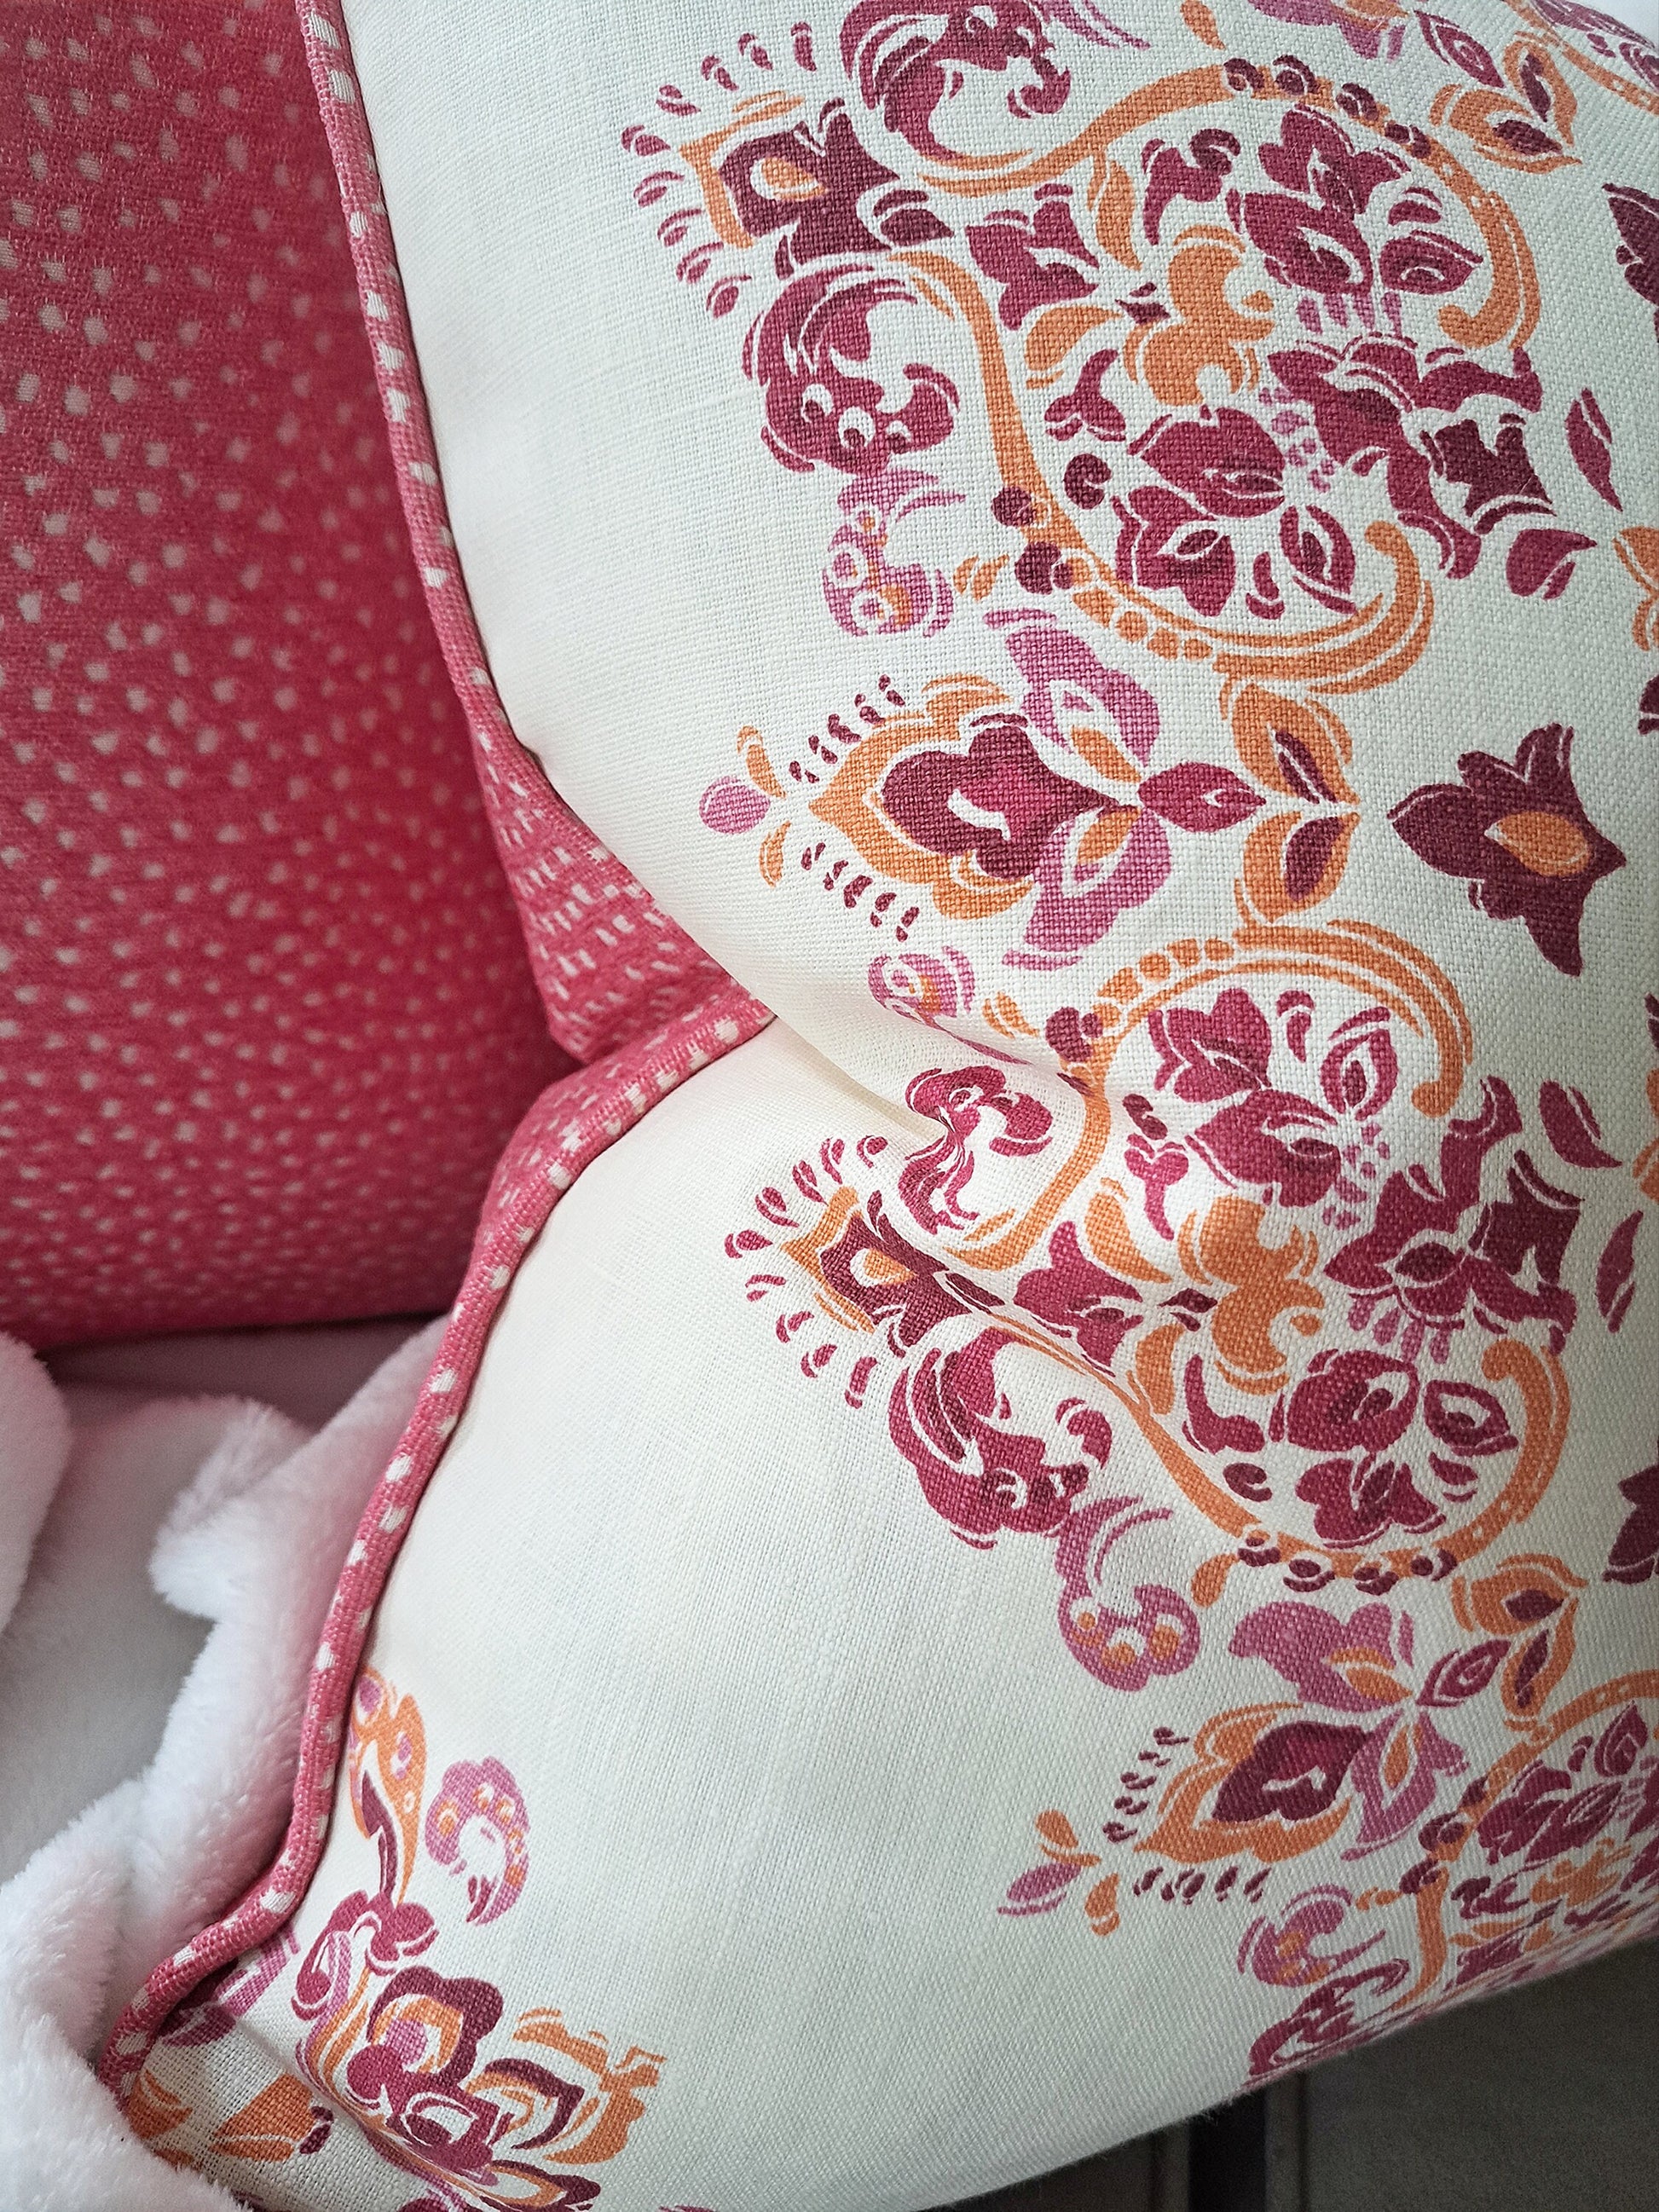 Pink and Orange Damask Print Pillow Cover